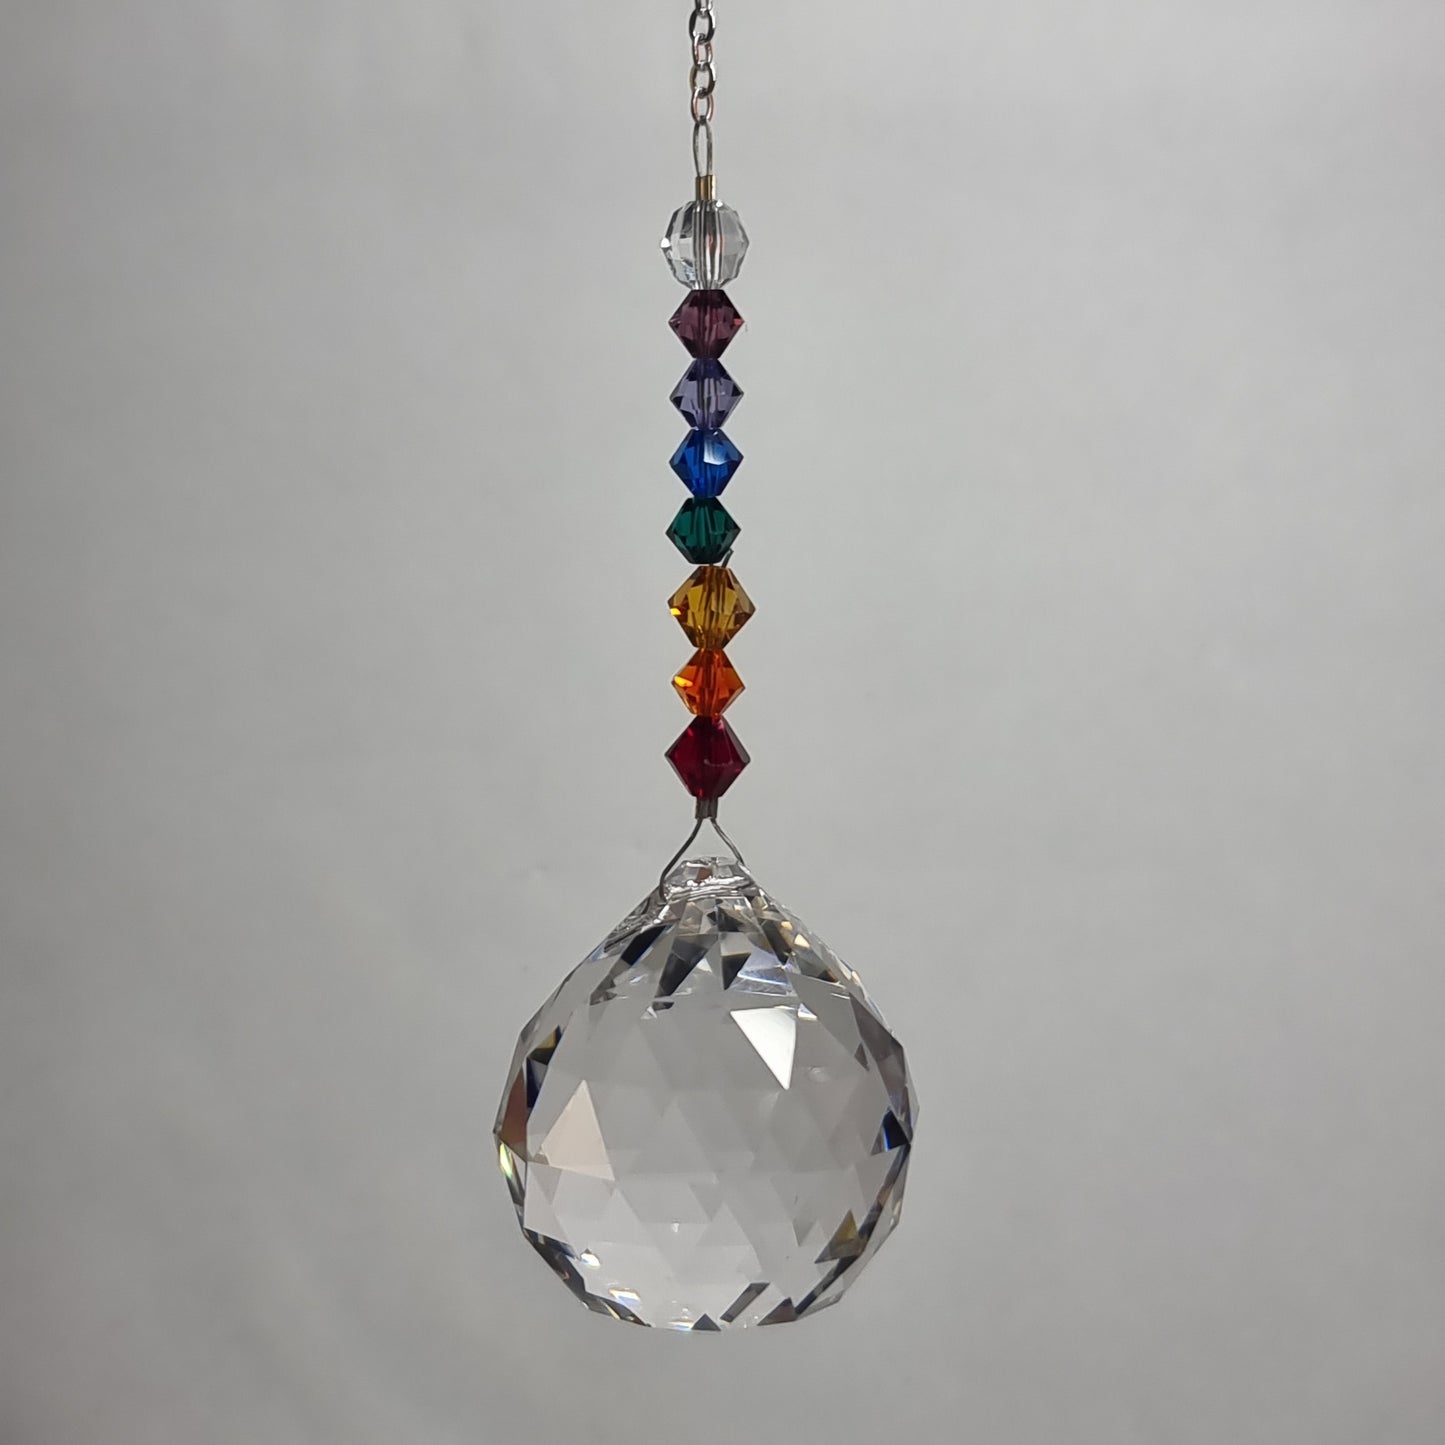 Clarus hanging - chakra sphere - Rivendell Shop